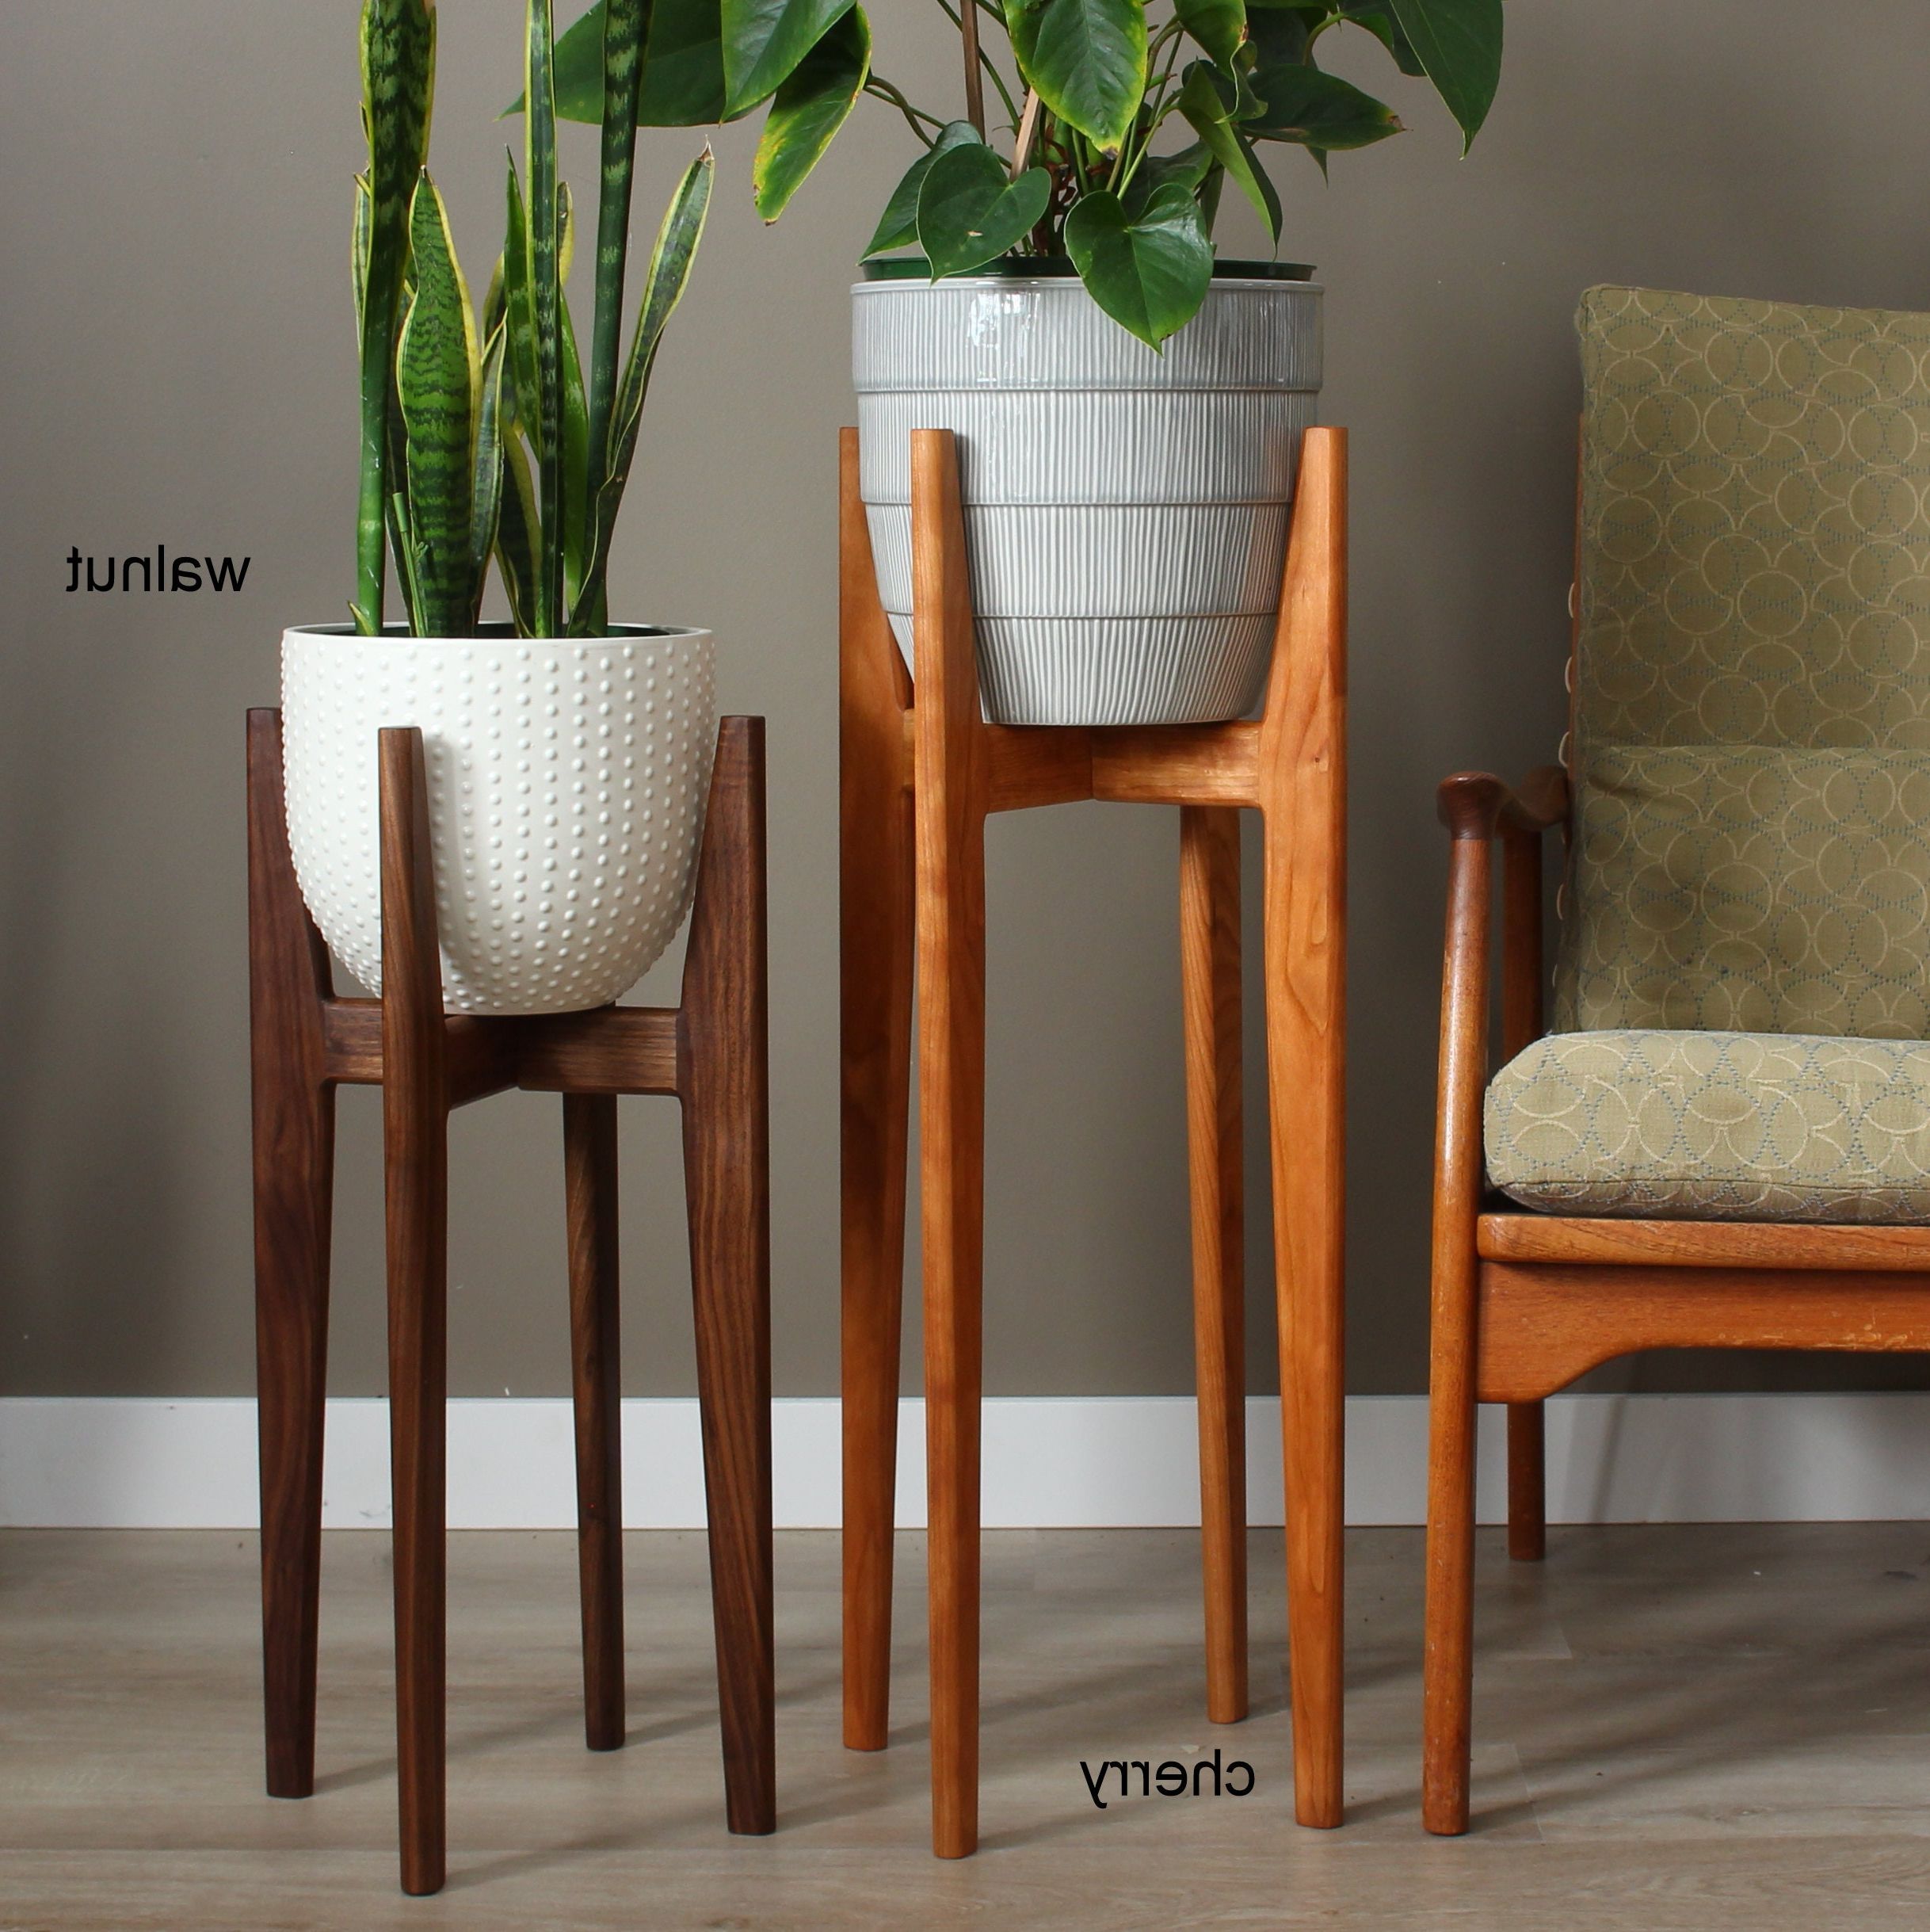 Wooden Plant Stands Intended For Most Popular Mid Century Modern Plant Stand Our Original Design Indoor – Etsy Italia (View 1 of 15)